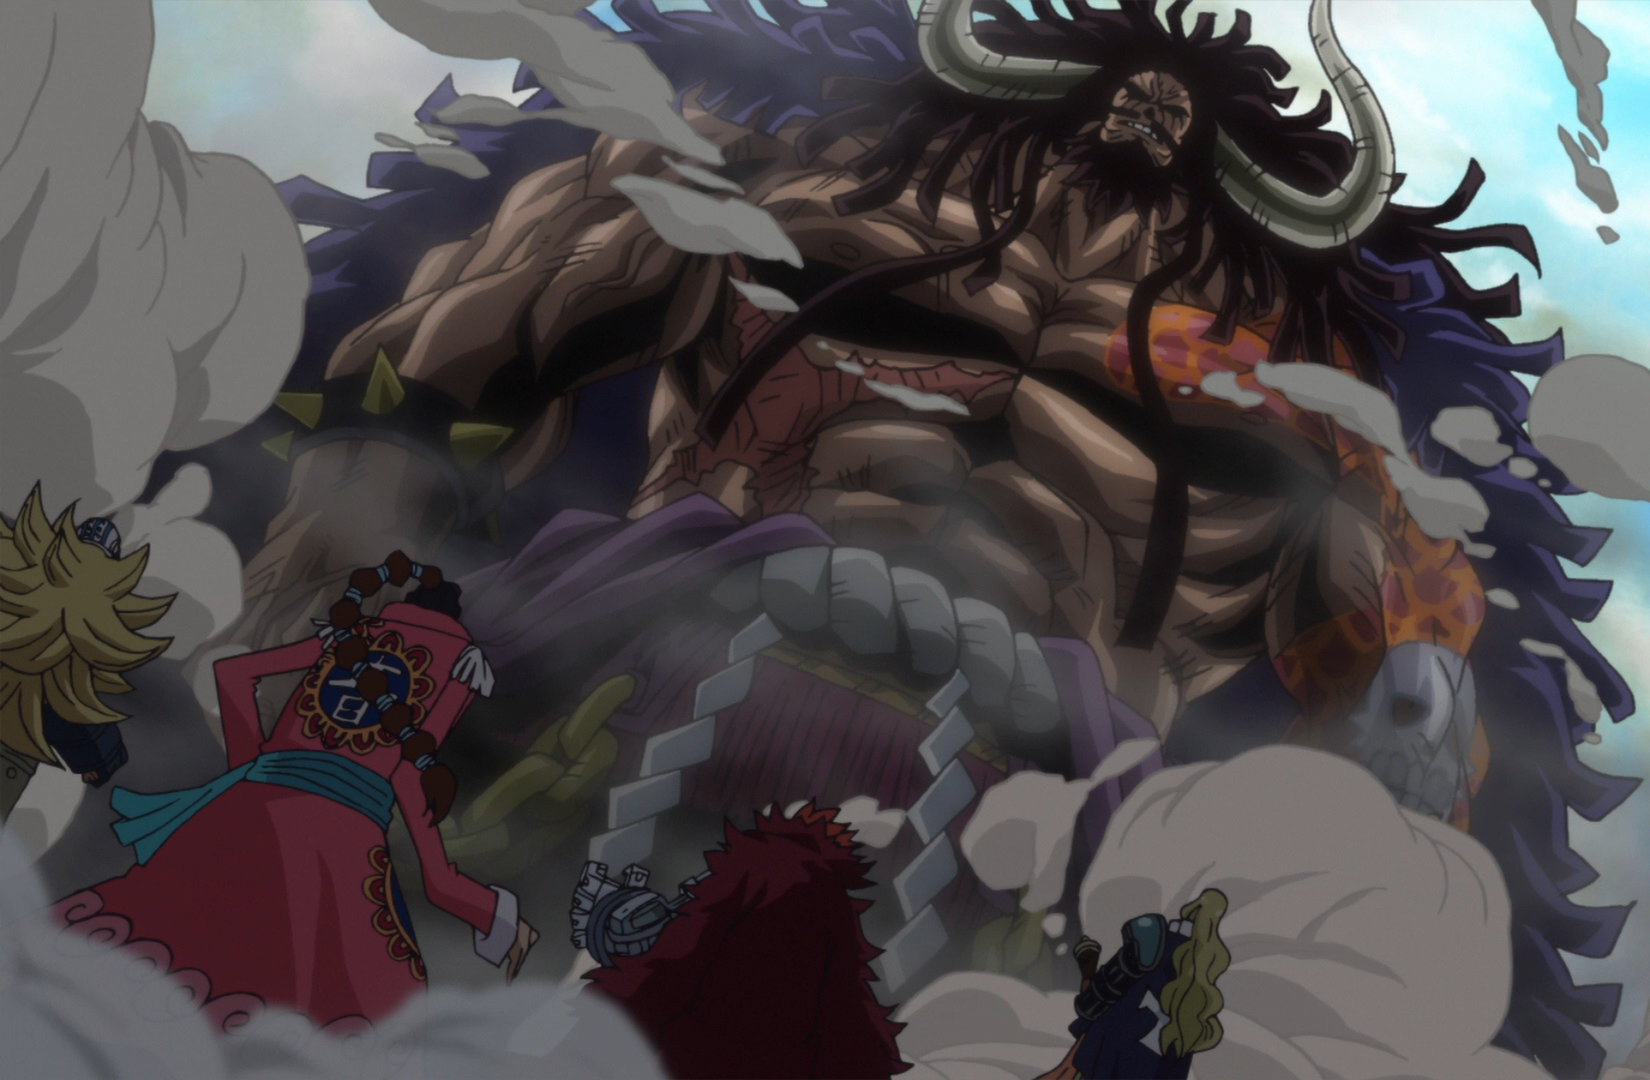 If Big Mom and Kaido successfully teamed up and got the One Piece + Pluton  + Poseidon, then the WG teamed up with Shanks and Mihawk, who do you think  would win